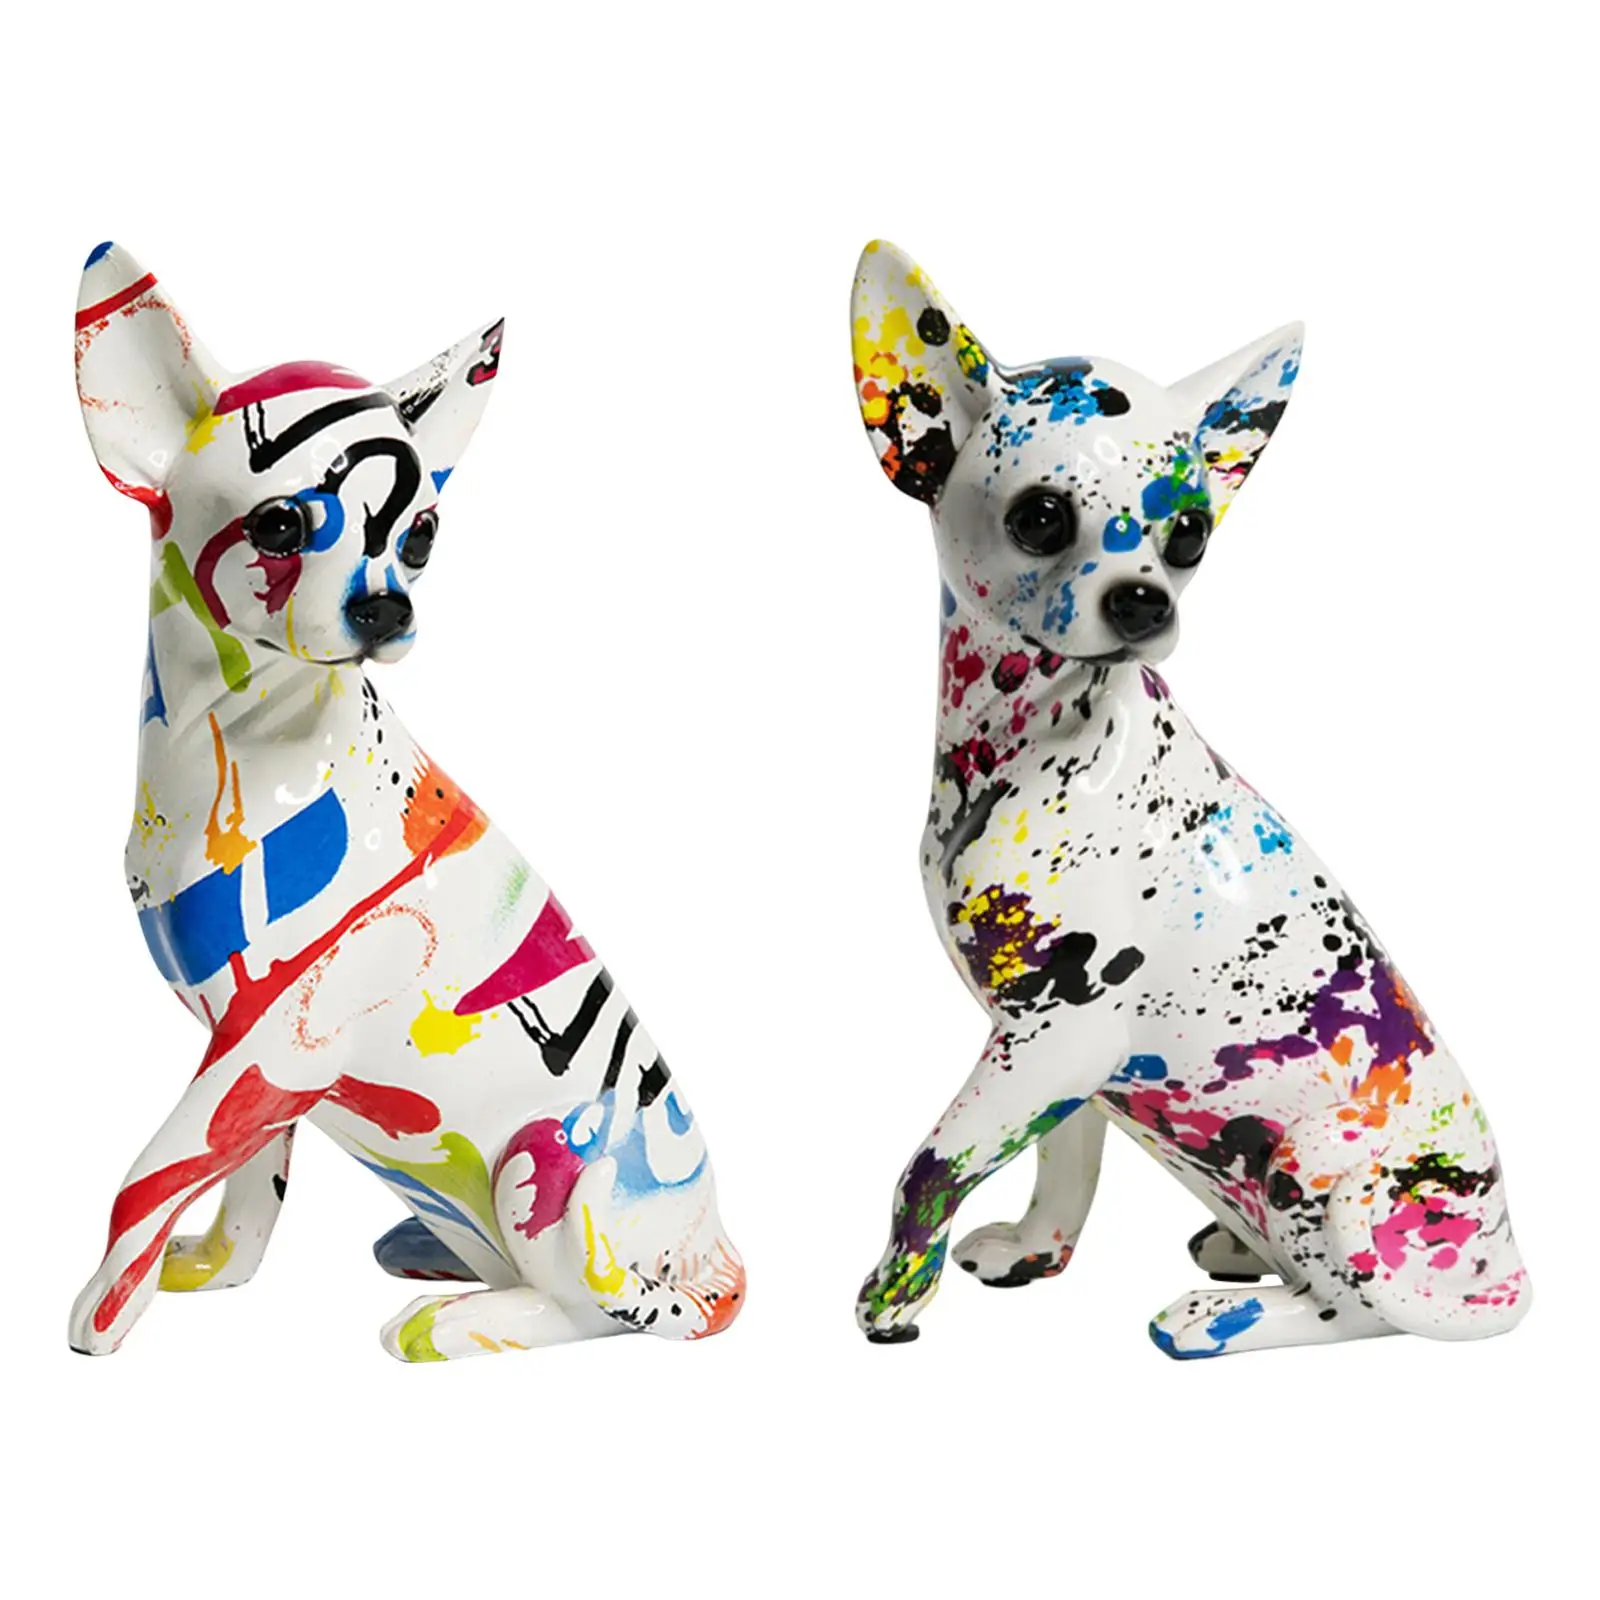 Creative Colorful Modern Graffiti Art Chihuahua Statue Art Figurine Resin Crafts for Living Room Home Decor Dog Lover Gift